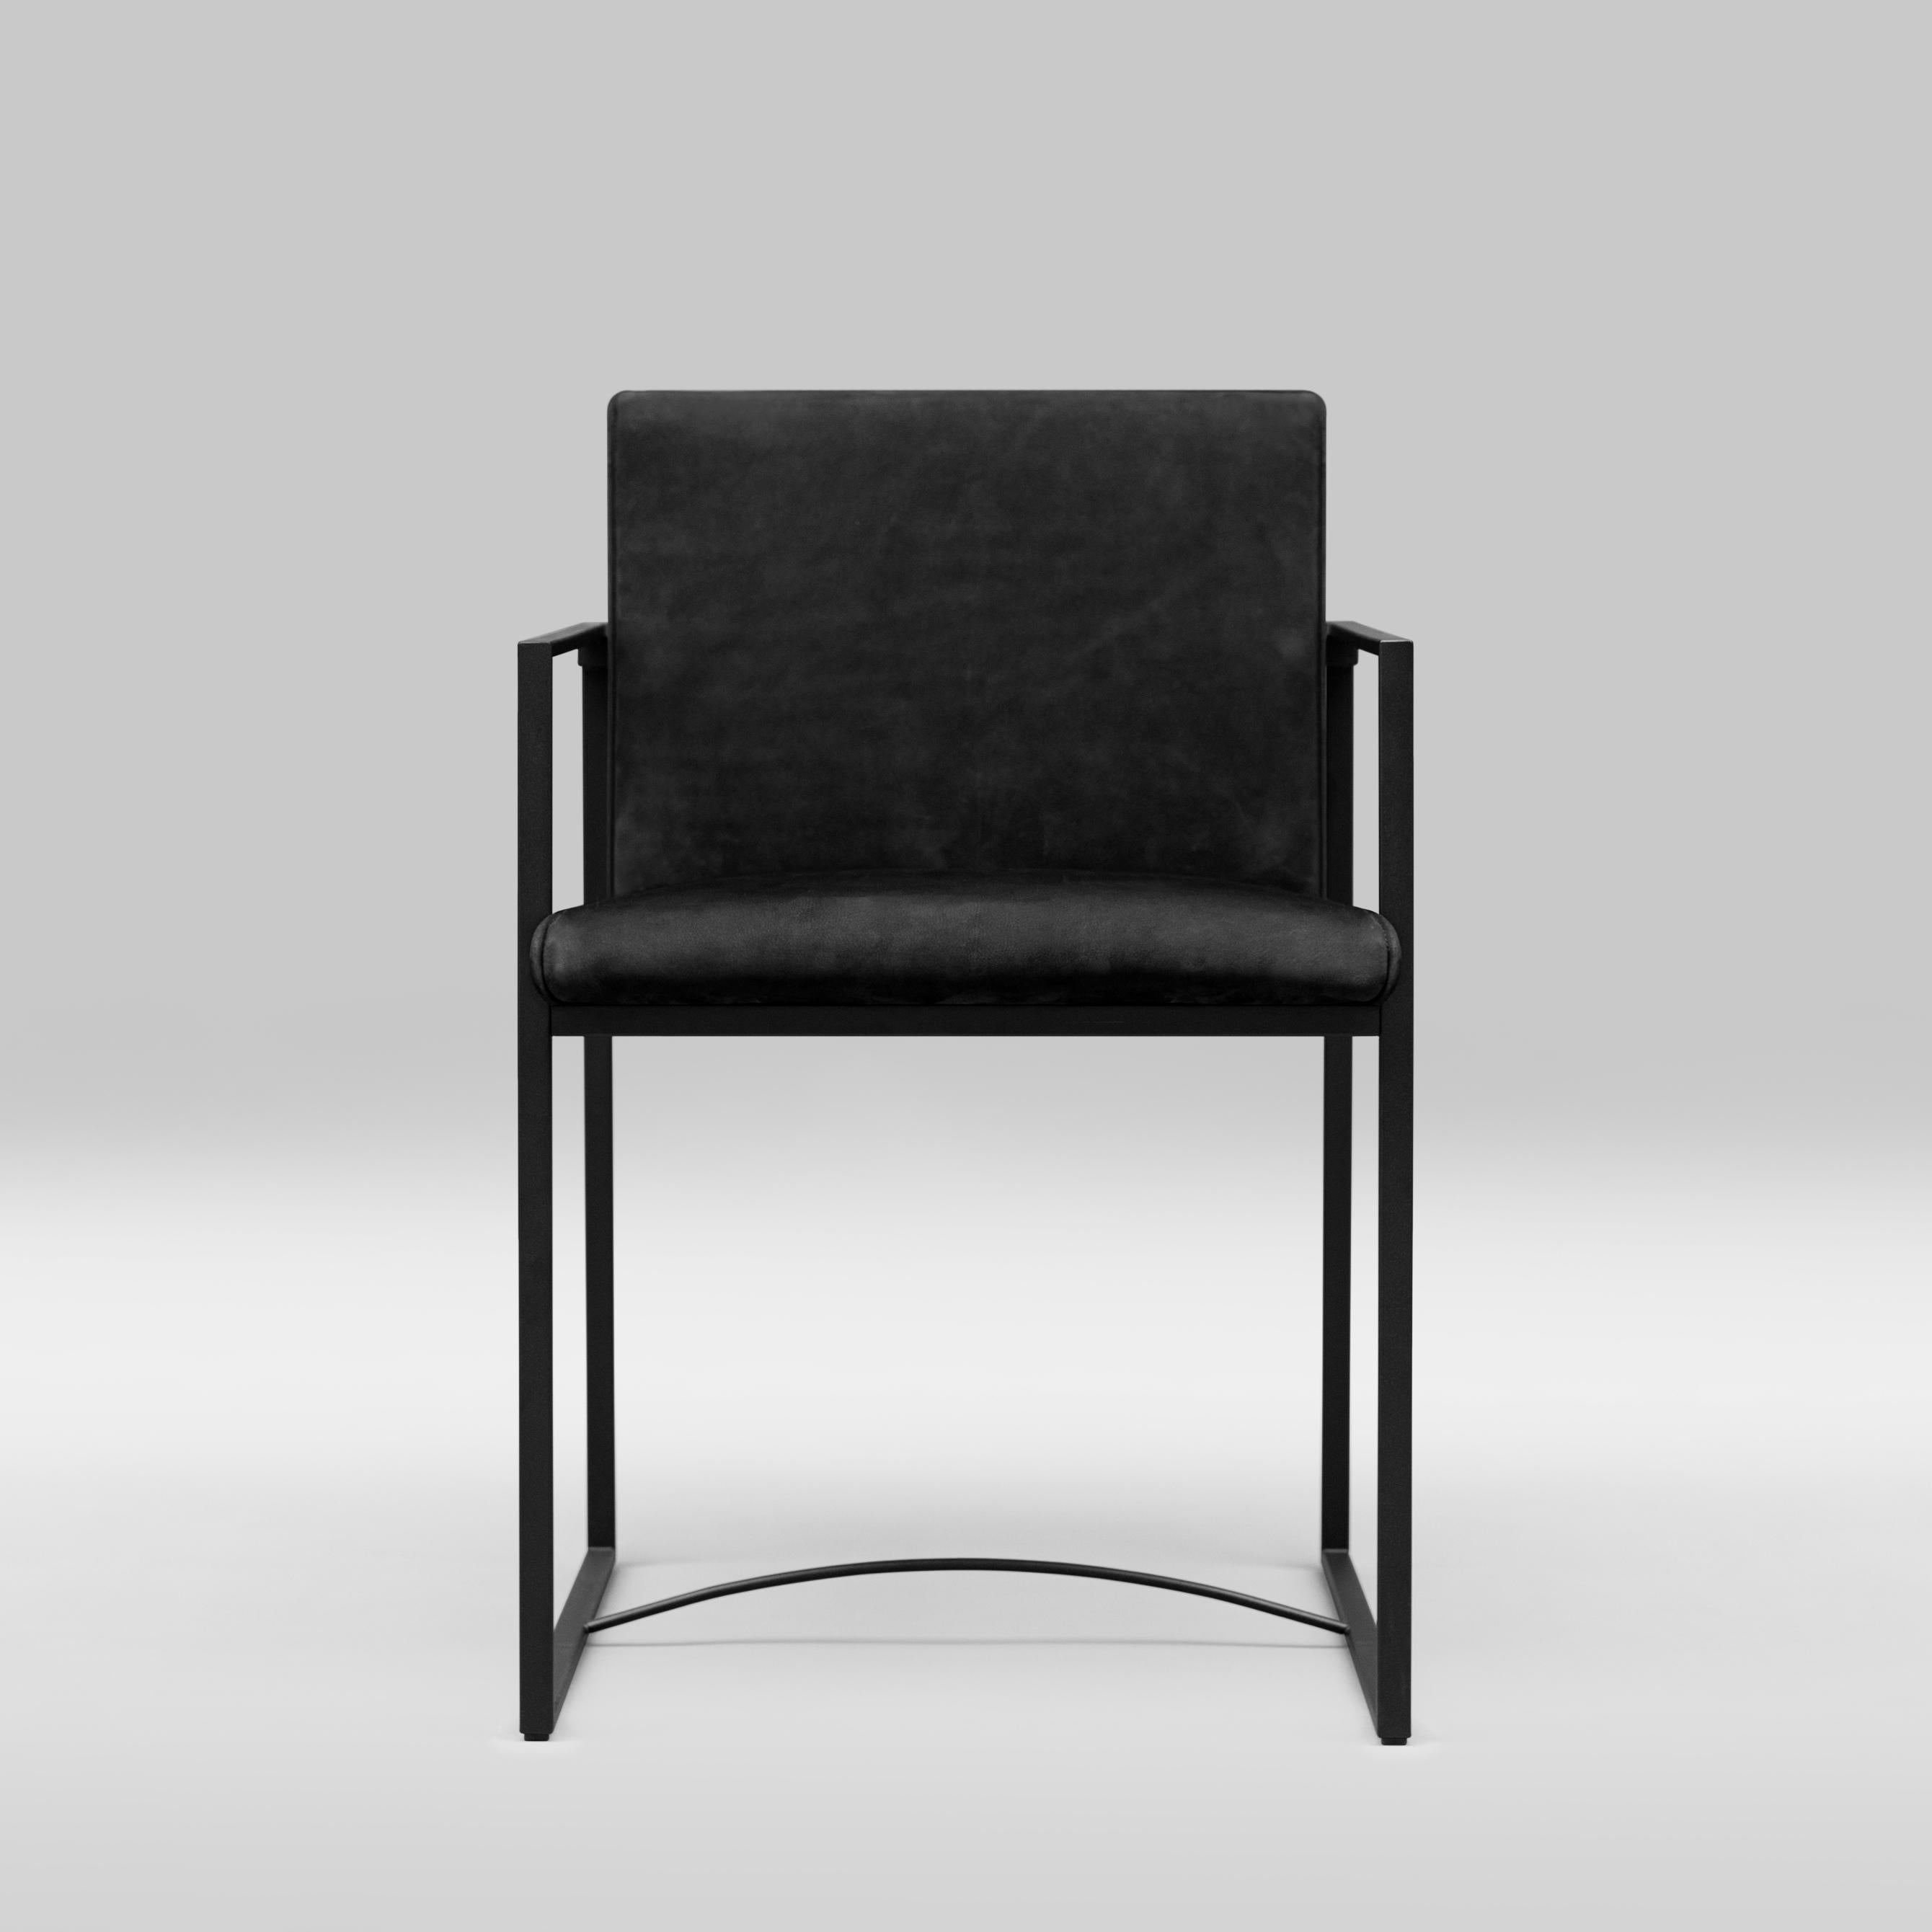 Armchair designed by Peter Ghyczy in 2018.
Manufactured by Ghyczy (Netherlands)

Material and color:
Frame charcoal
Cast part charcoal
Fabric O/01 (Q5)
No piping

Dimensions:
L 52 x W 50 x H 47

Production delay:
8 weeks.

GHYCZY is a